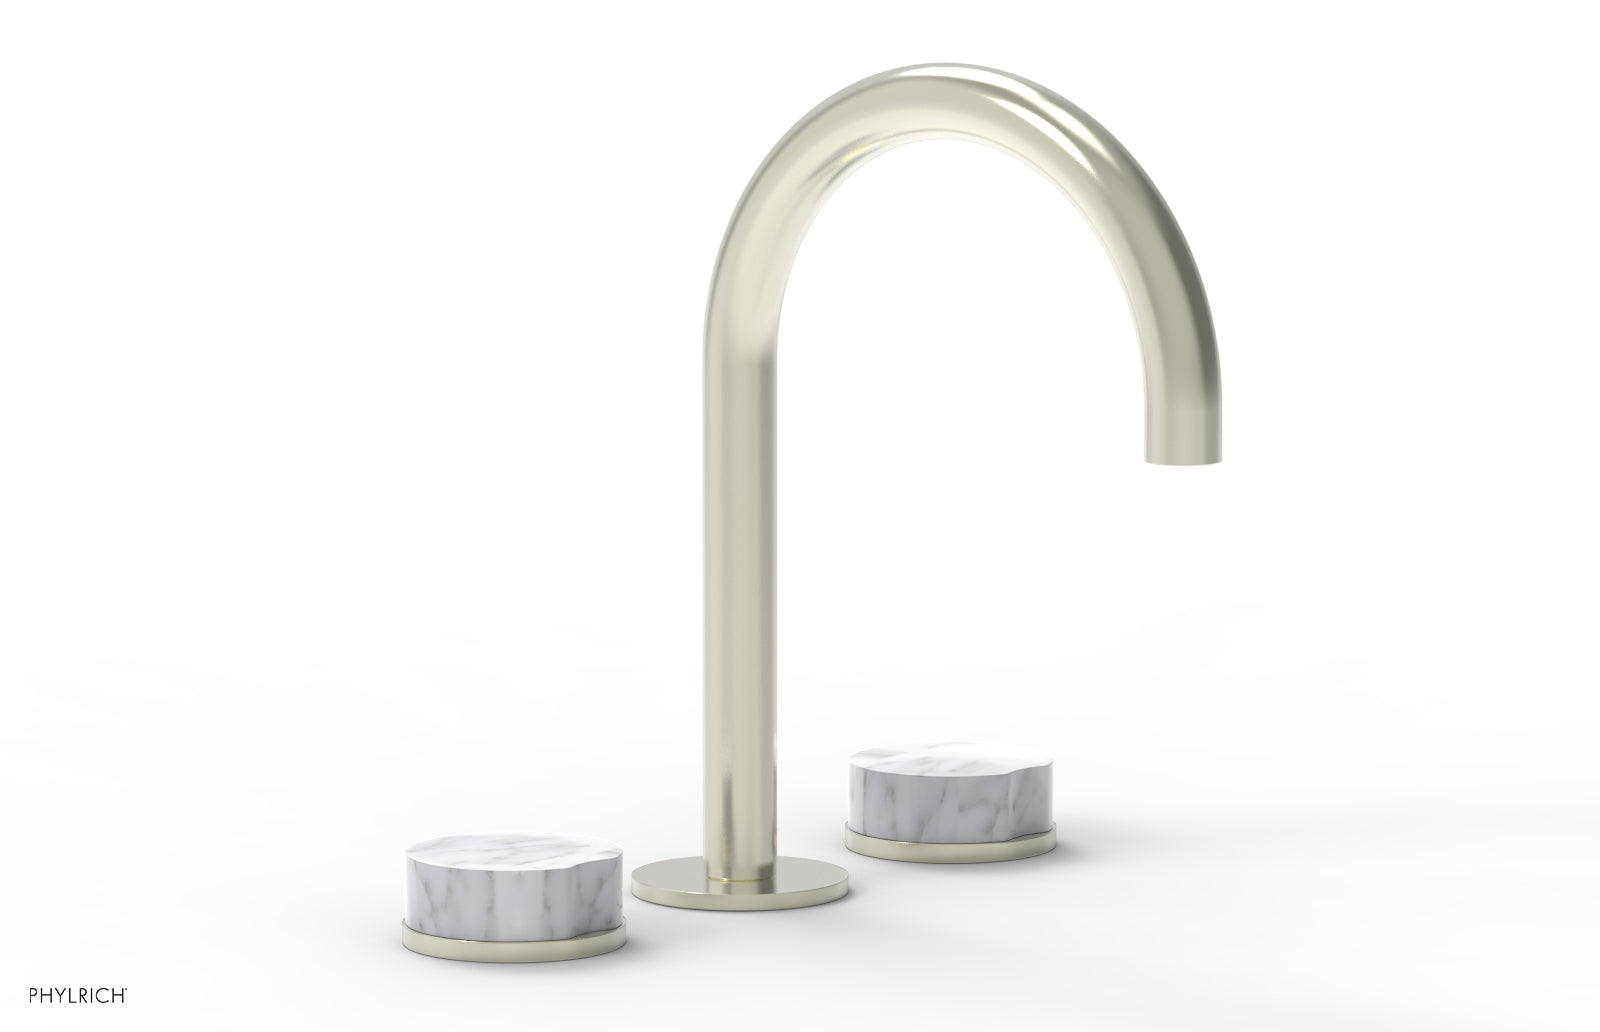 Phylrich CIRC Widespread Faucet High Spout, White Marble Handles